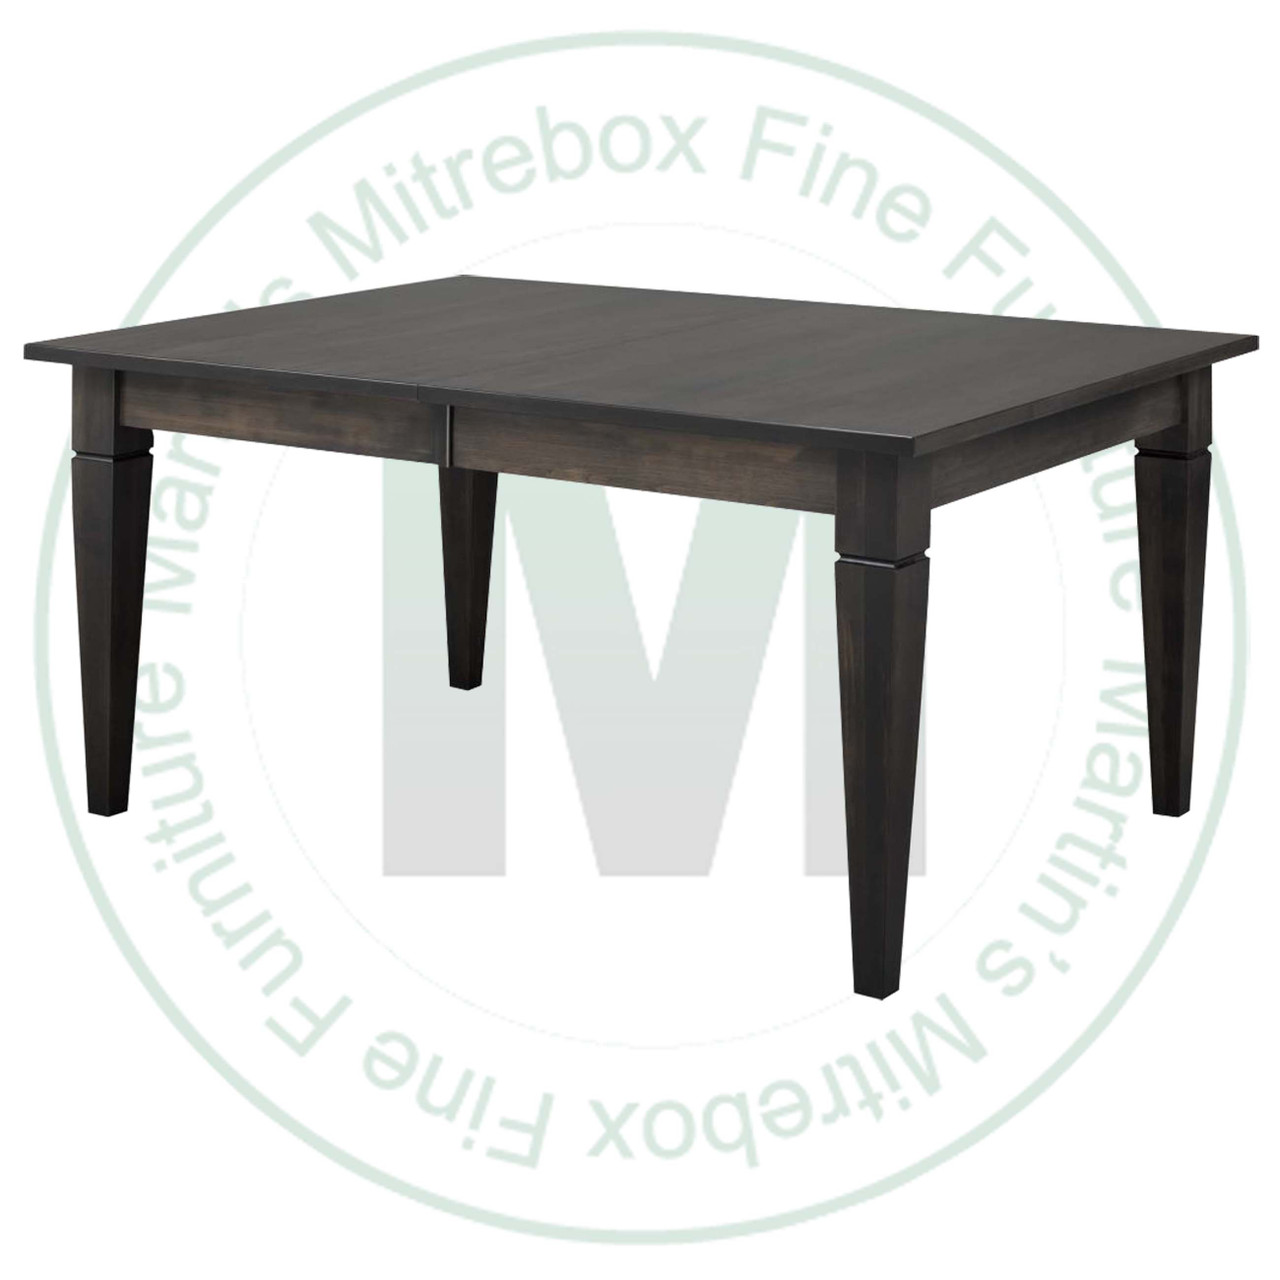 Wormy Maple Reesor Extension Harvest Table 42''D x 60''W x 30''H With 3 - 12'' Leaves Table Has 1 3/4'' Thick Top